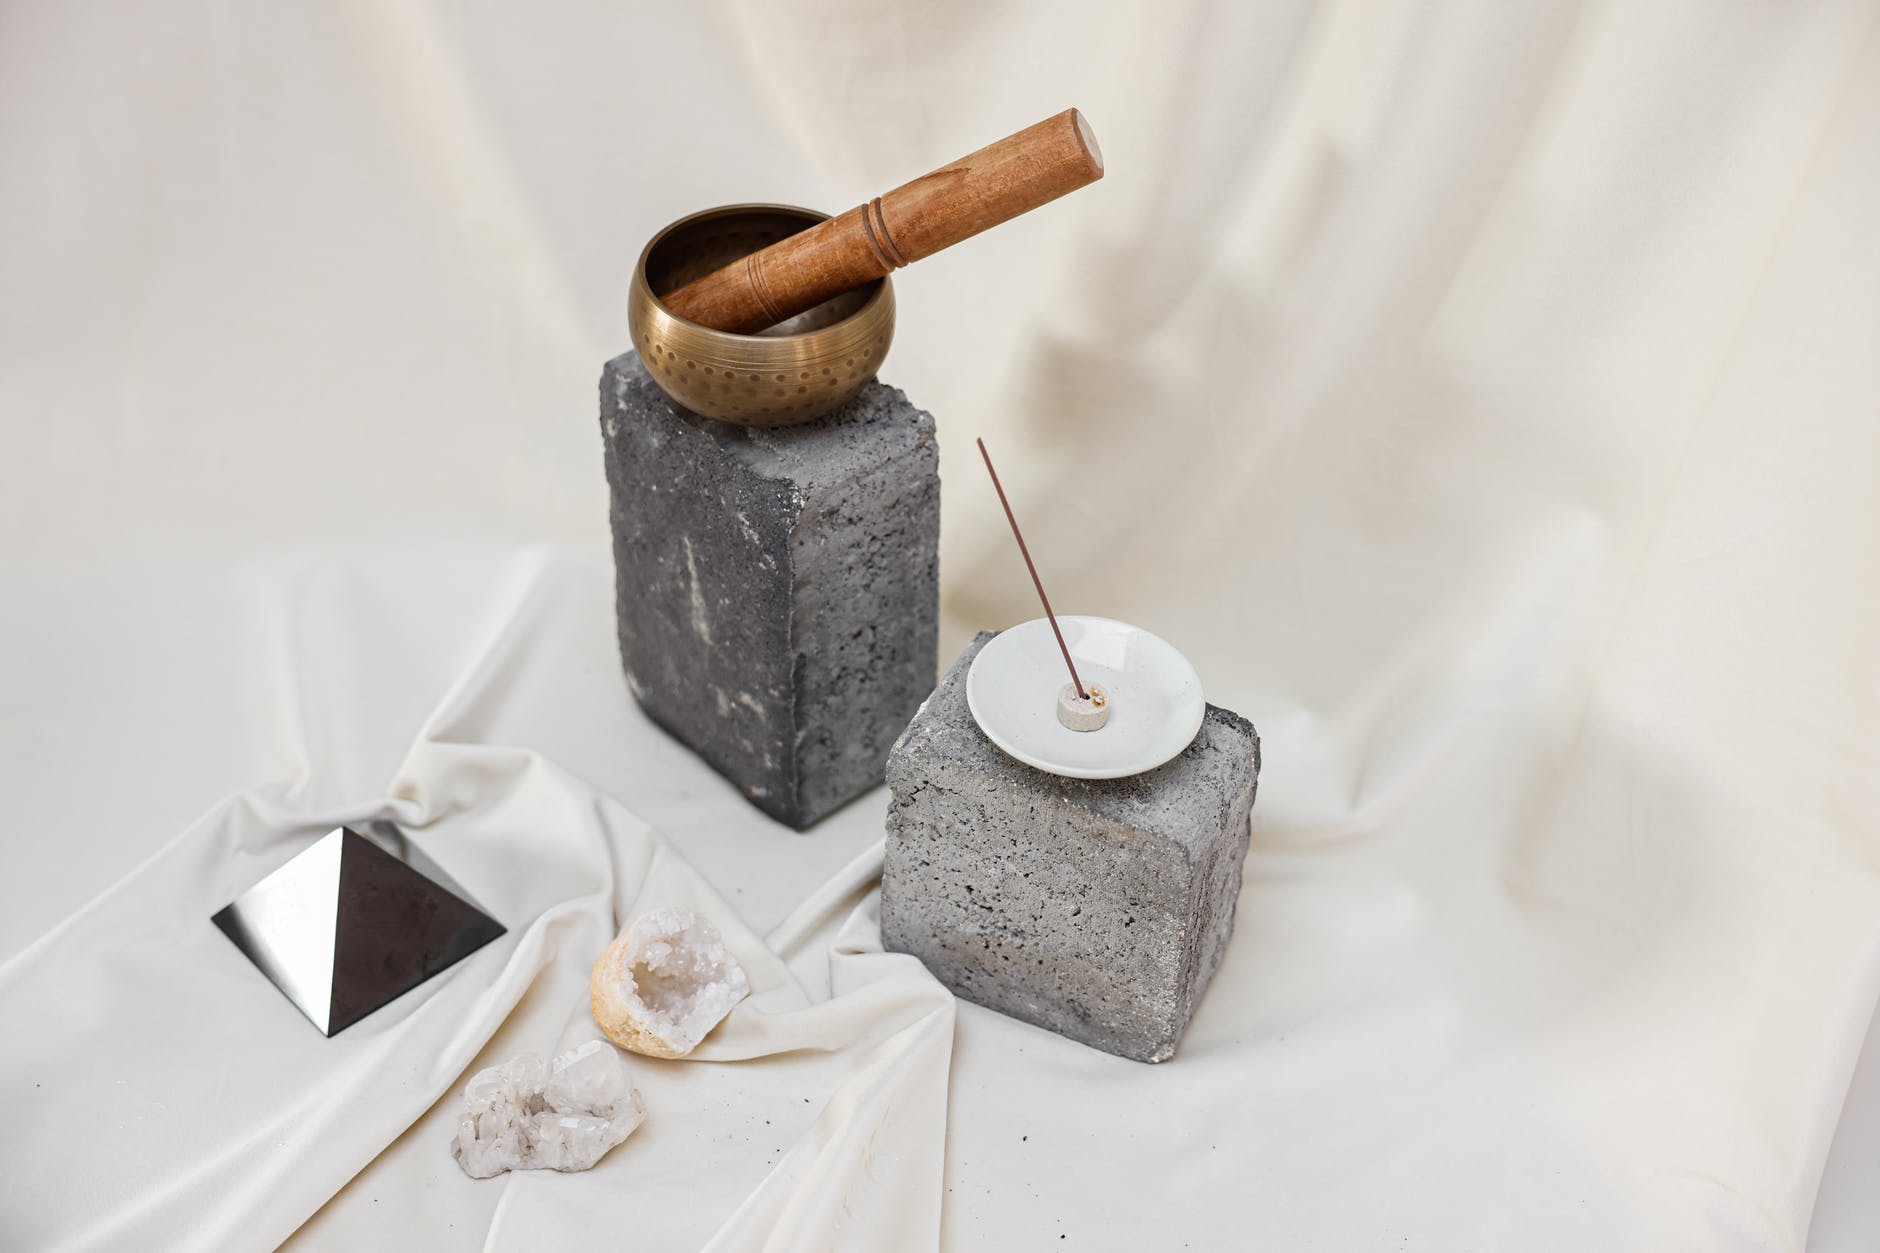 singing bowl and incense stick